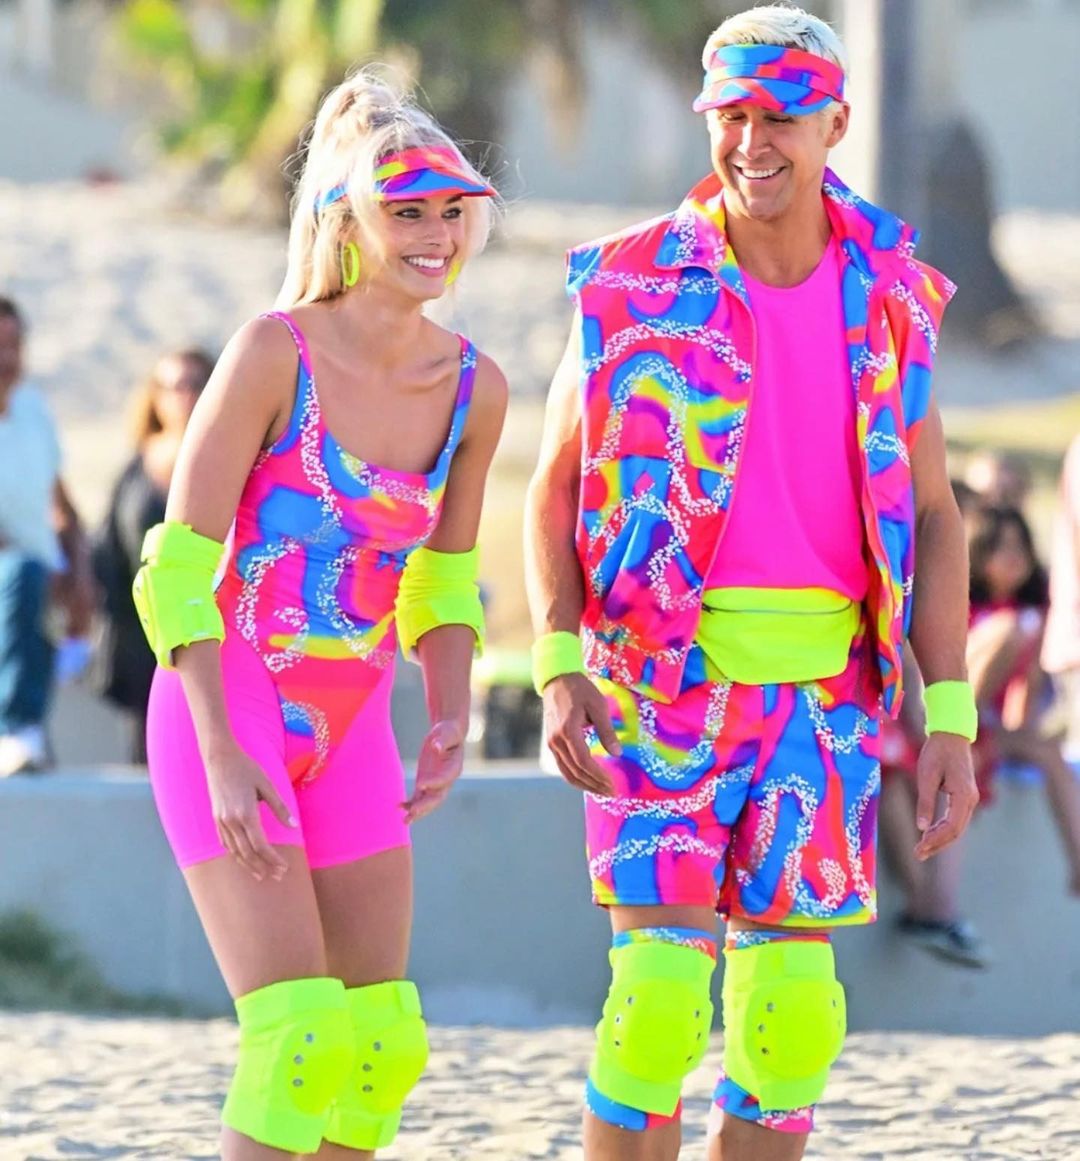 Gronk and Camille Kostek as Margot Robbie and Ryan Gosling’s Ken and Barbie!